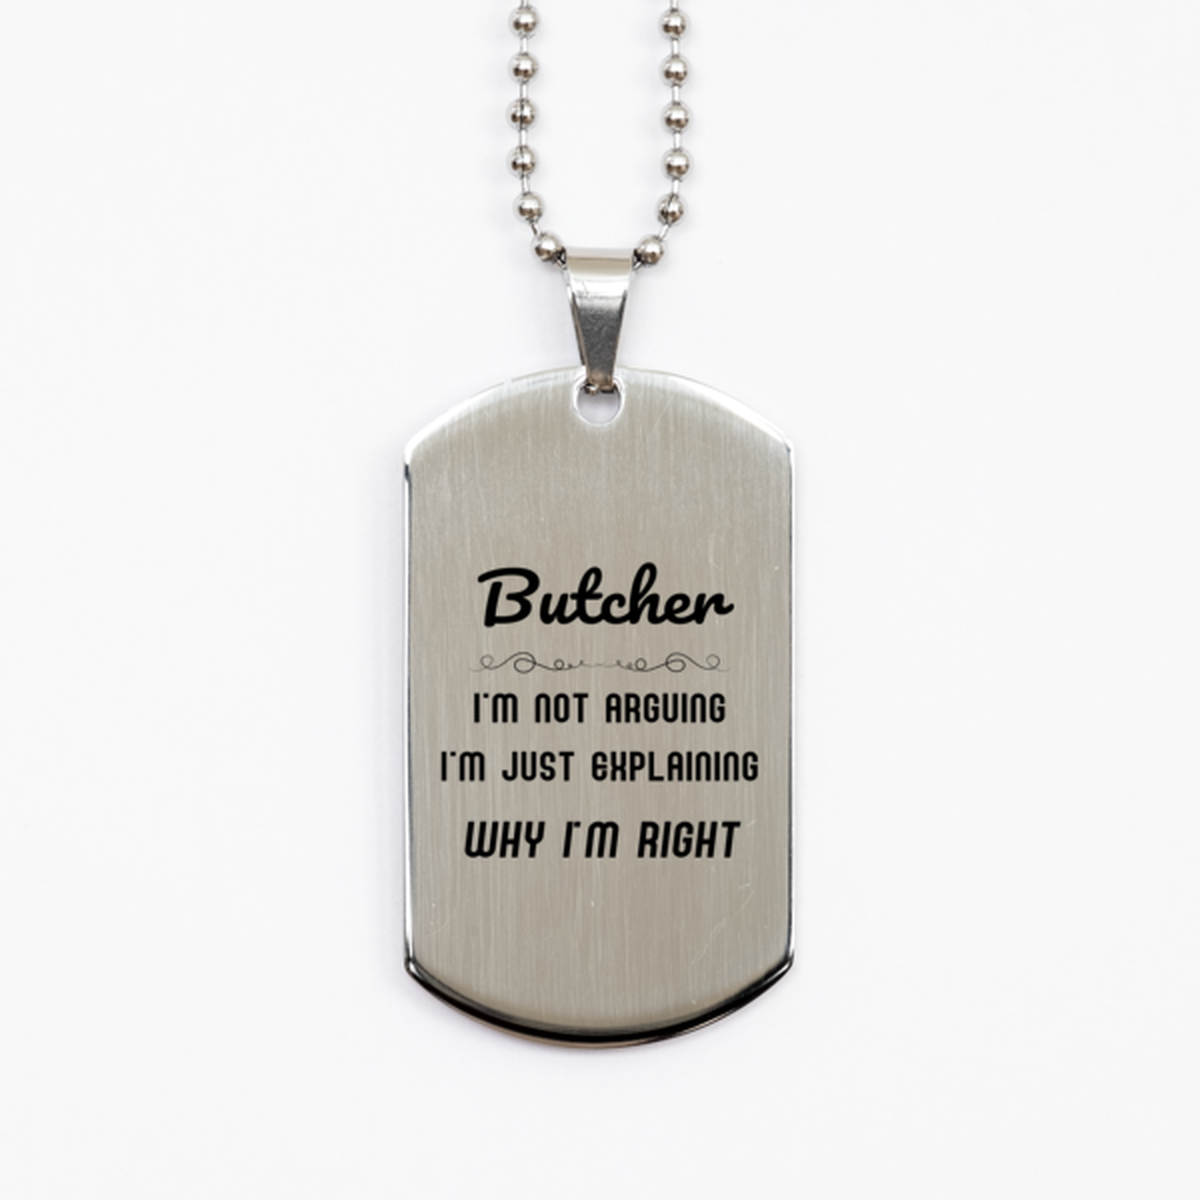 Butcher I'm not Arguing. I'm Just Explaining Why I'm RIGHT Silver Dog Tag, Funny Saying Quote Butcher Gifts For Butcher Graduation Birthday Christmas Gifts for Men Women Coworker